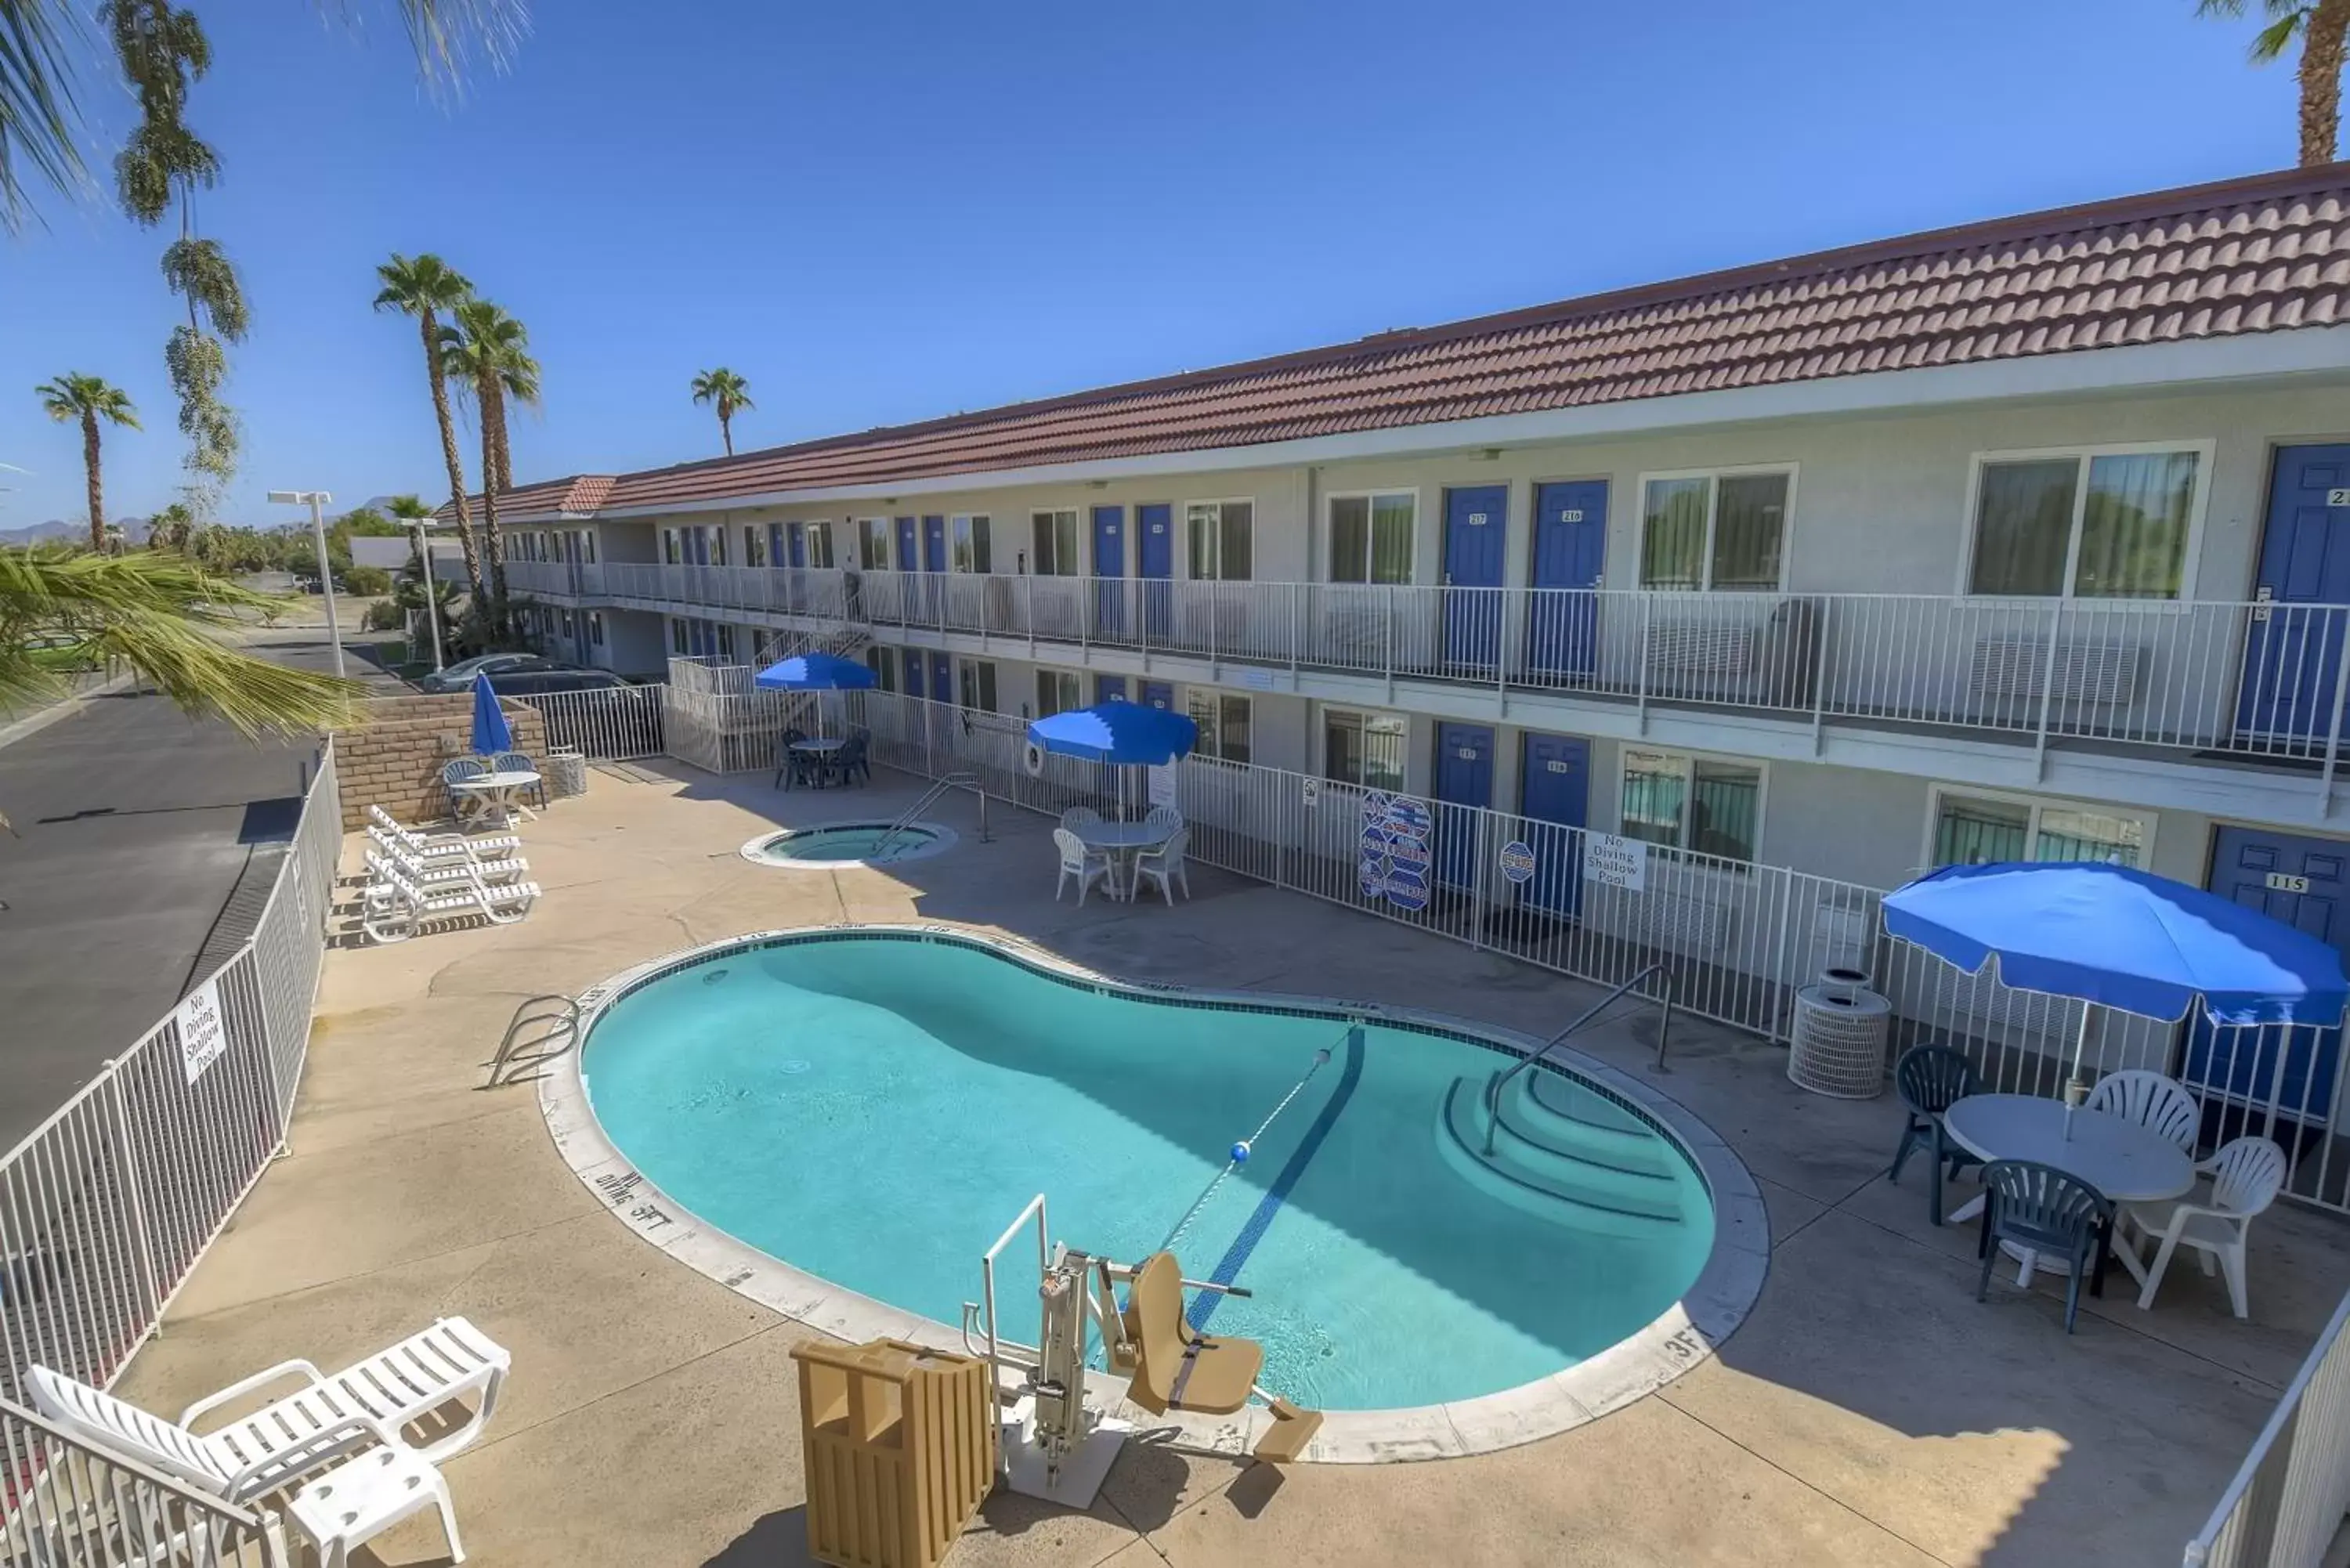 Swimming pool, Pool View in Motel 6-Rancho Mirage, CA - Palm Springs